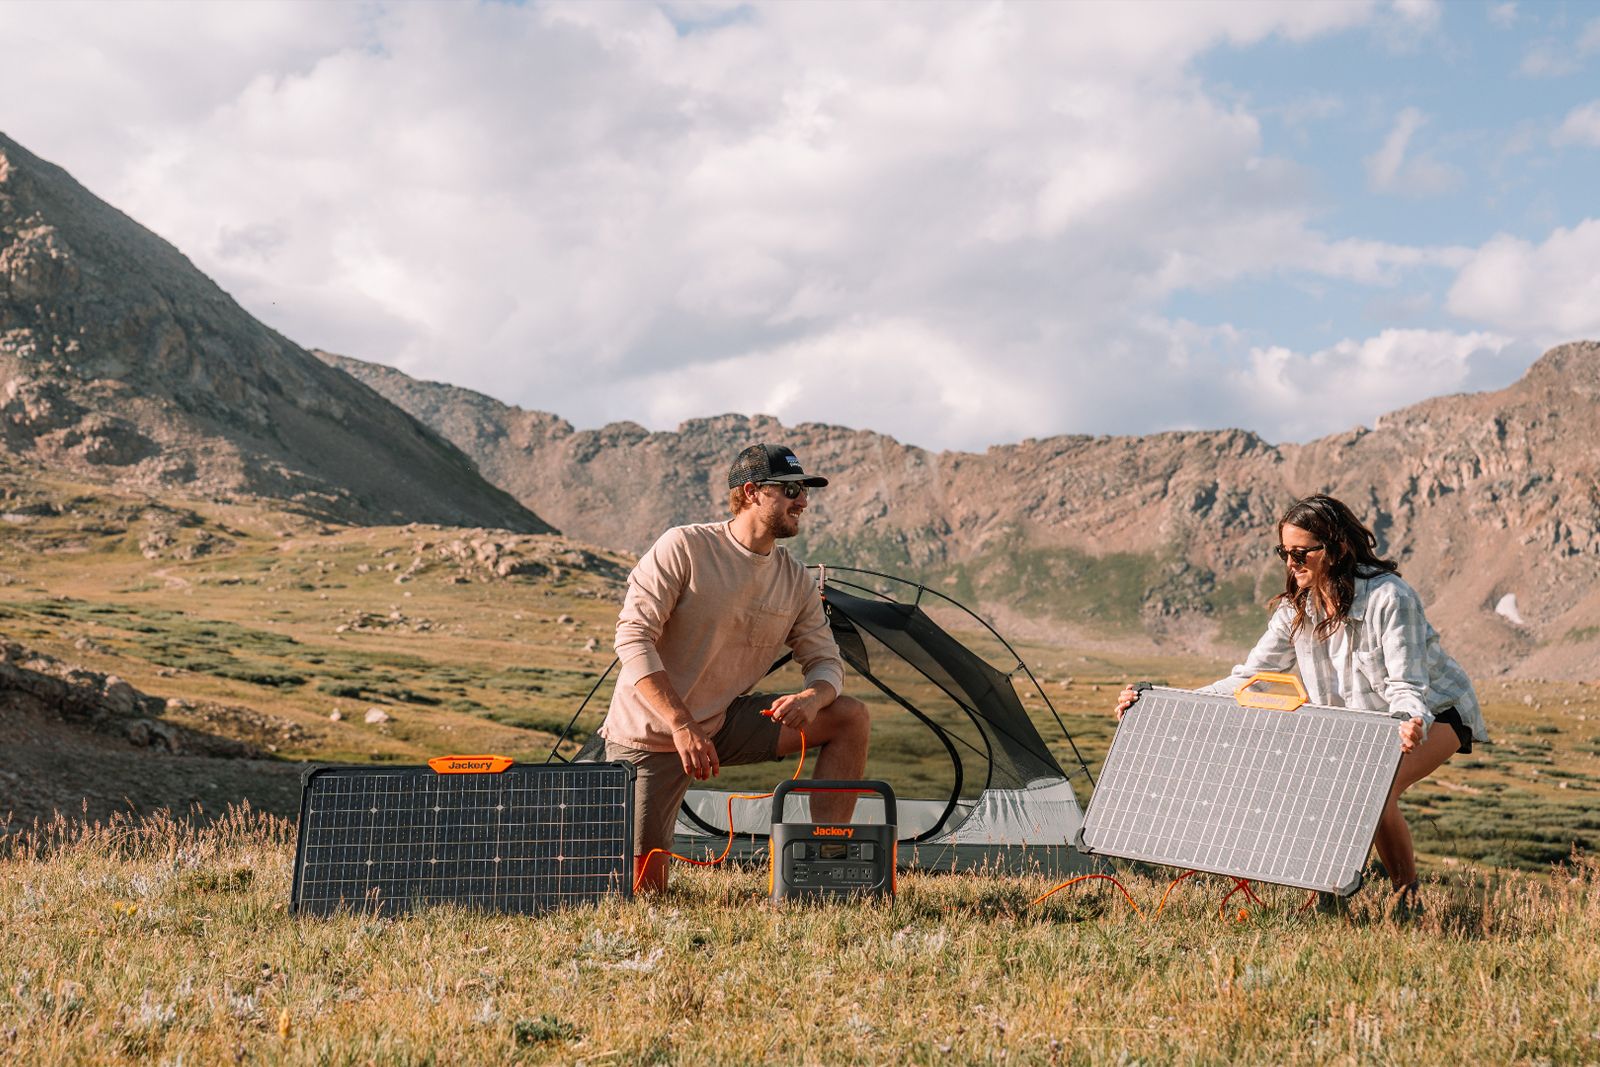 The speed of sunlight: New Jackery Solar Generator 1000 Pro enables fast solar charging photo 4